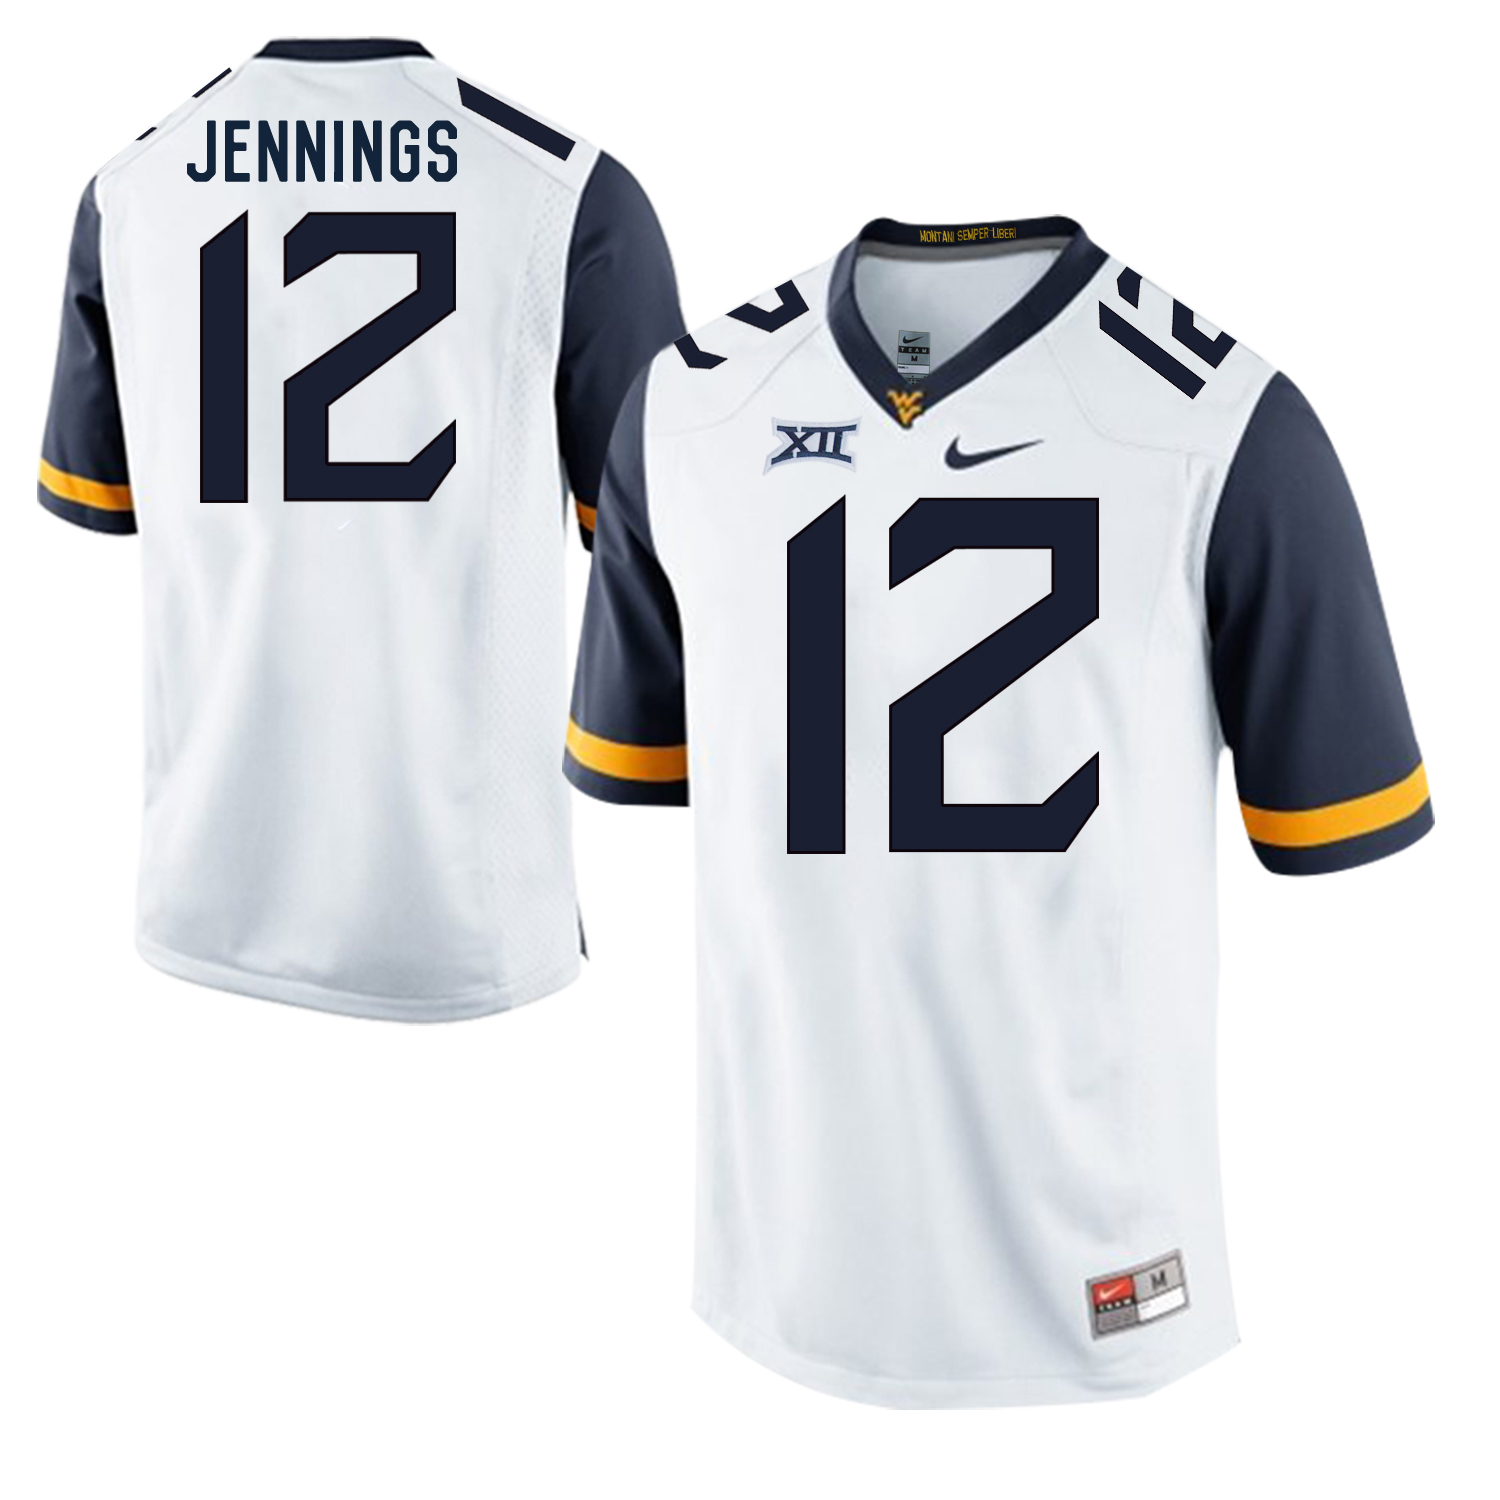 West Virginia Mountaineers 12 Gary Jennings White College Football Jersey